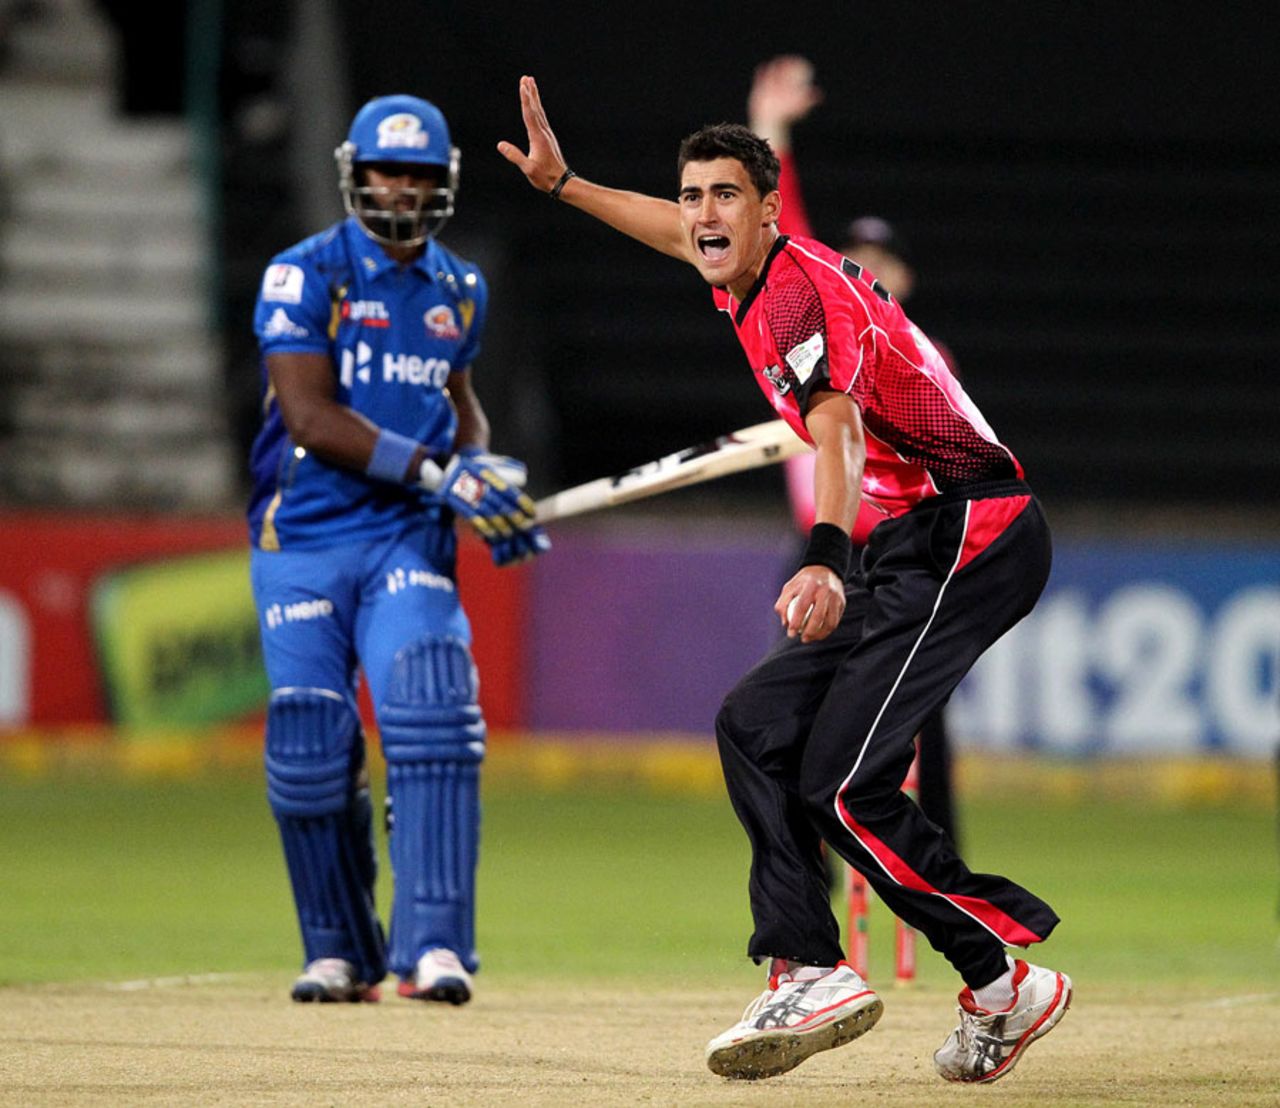 Mitchell Starc picked up two wickets, Mumbai Indians v Sydney Sixers, Champions League T20, Durban, October 22, 2012